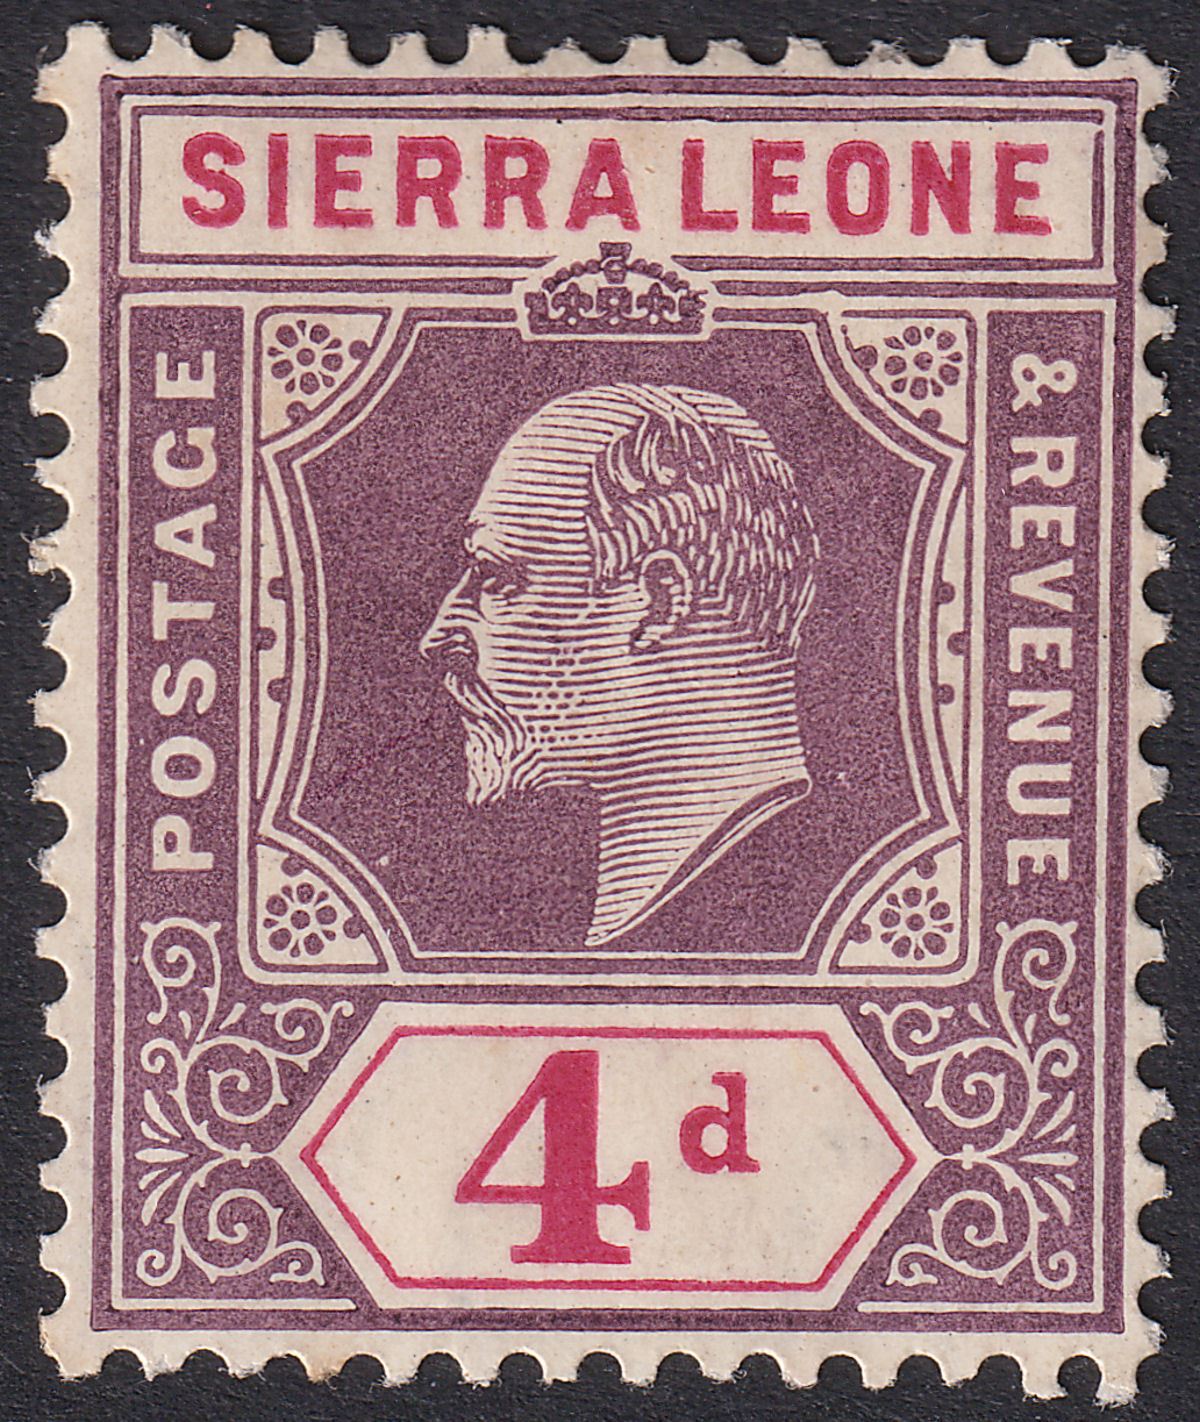 Sierra Leone 1905 KEVII 4d with Damaged Frame and Crown Variety Mint SG92a